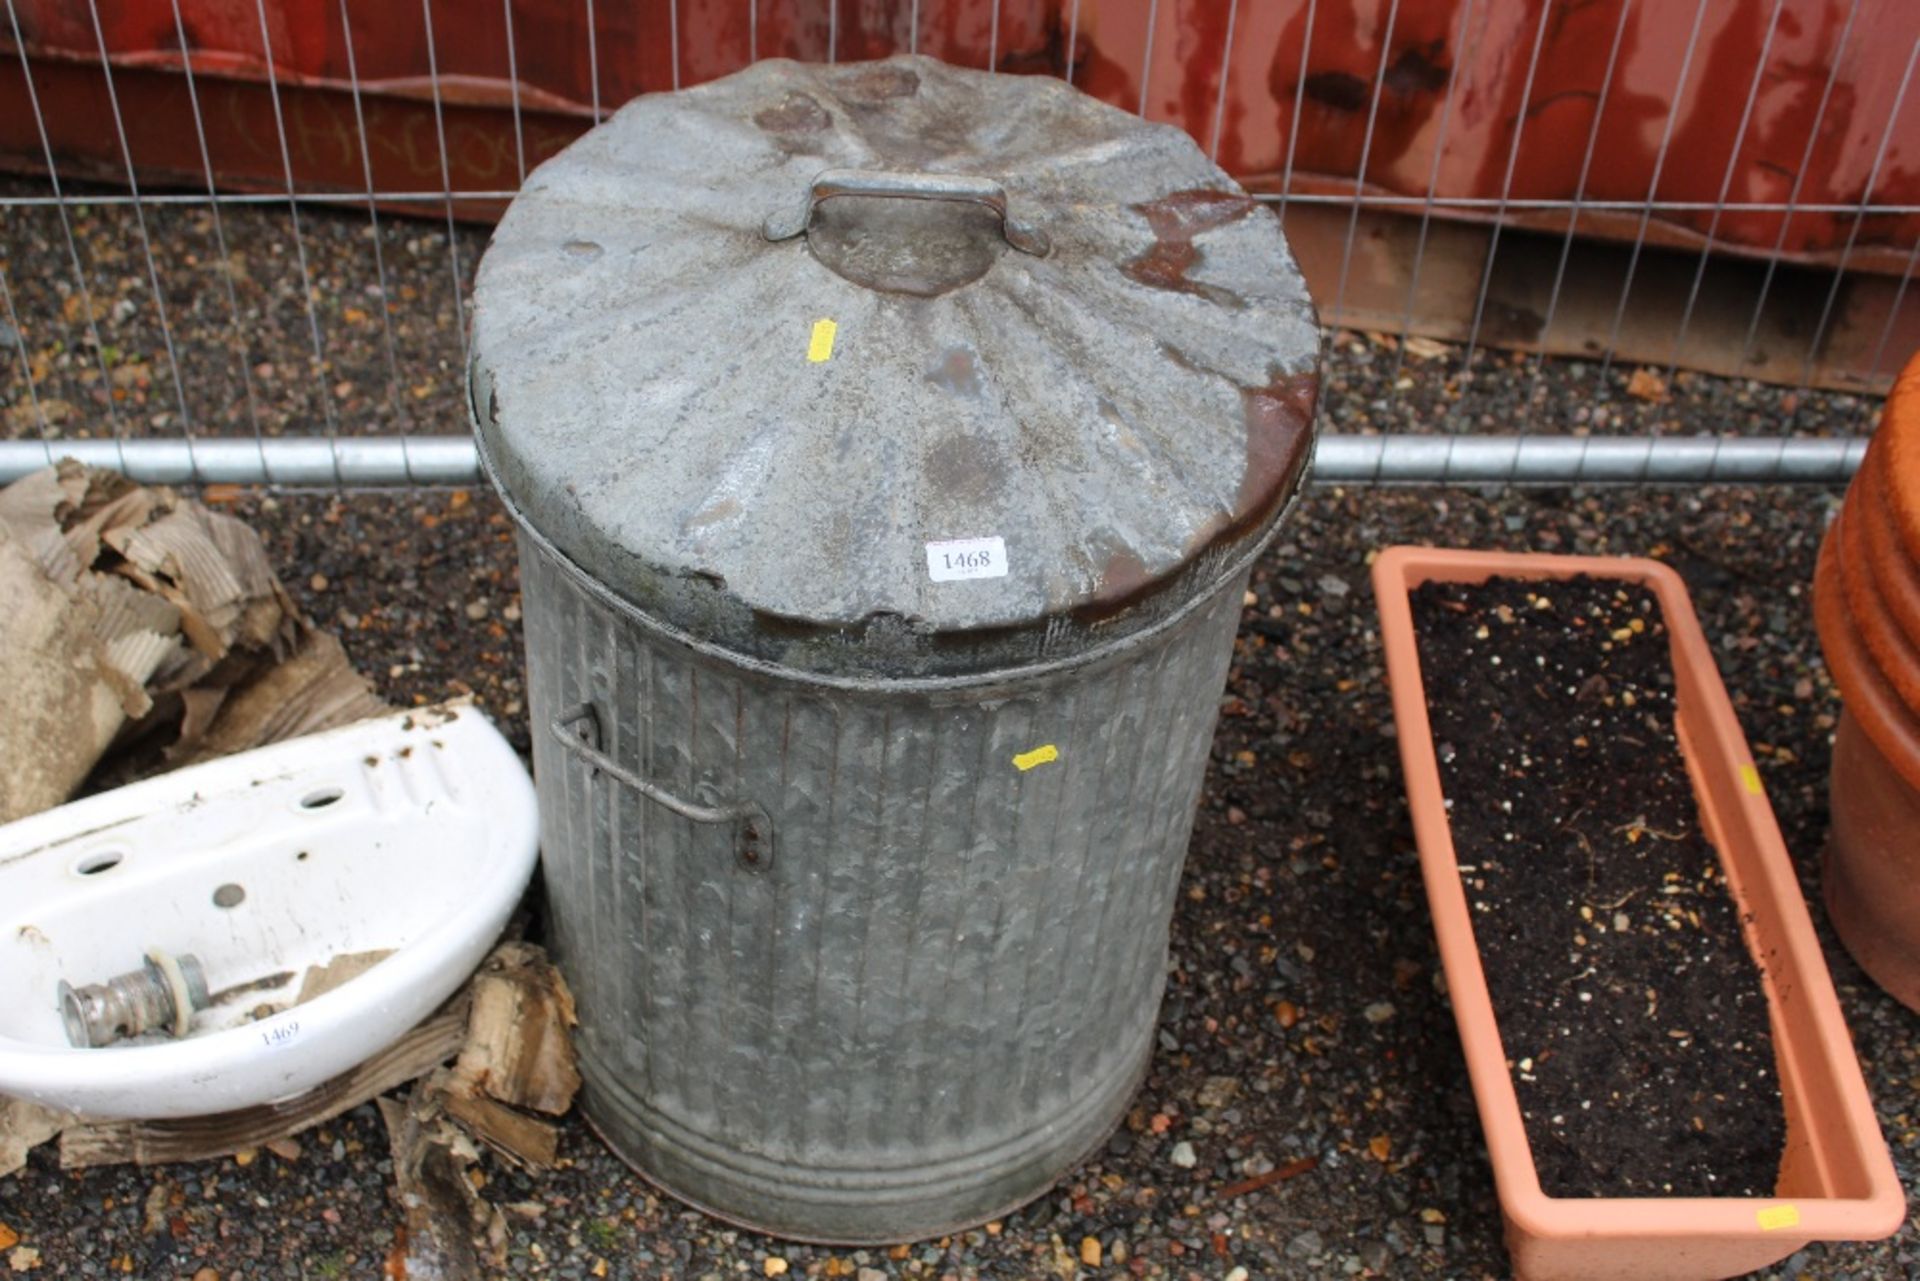 A galvanised dust bin and lid